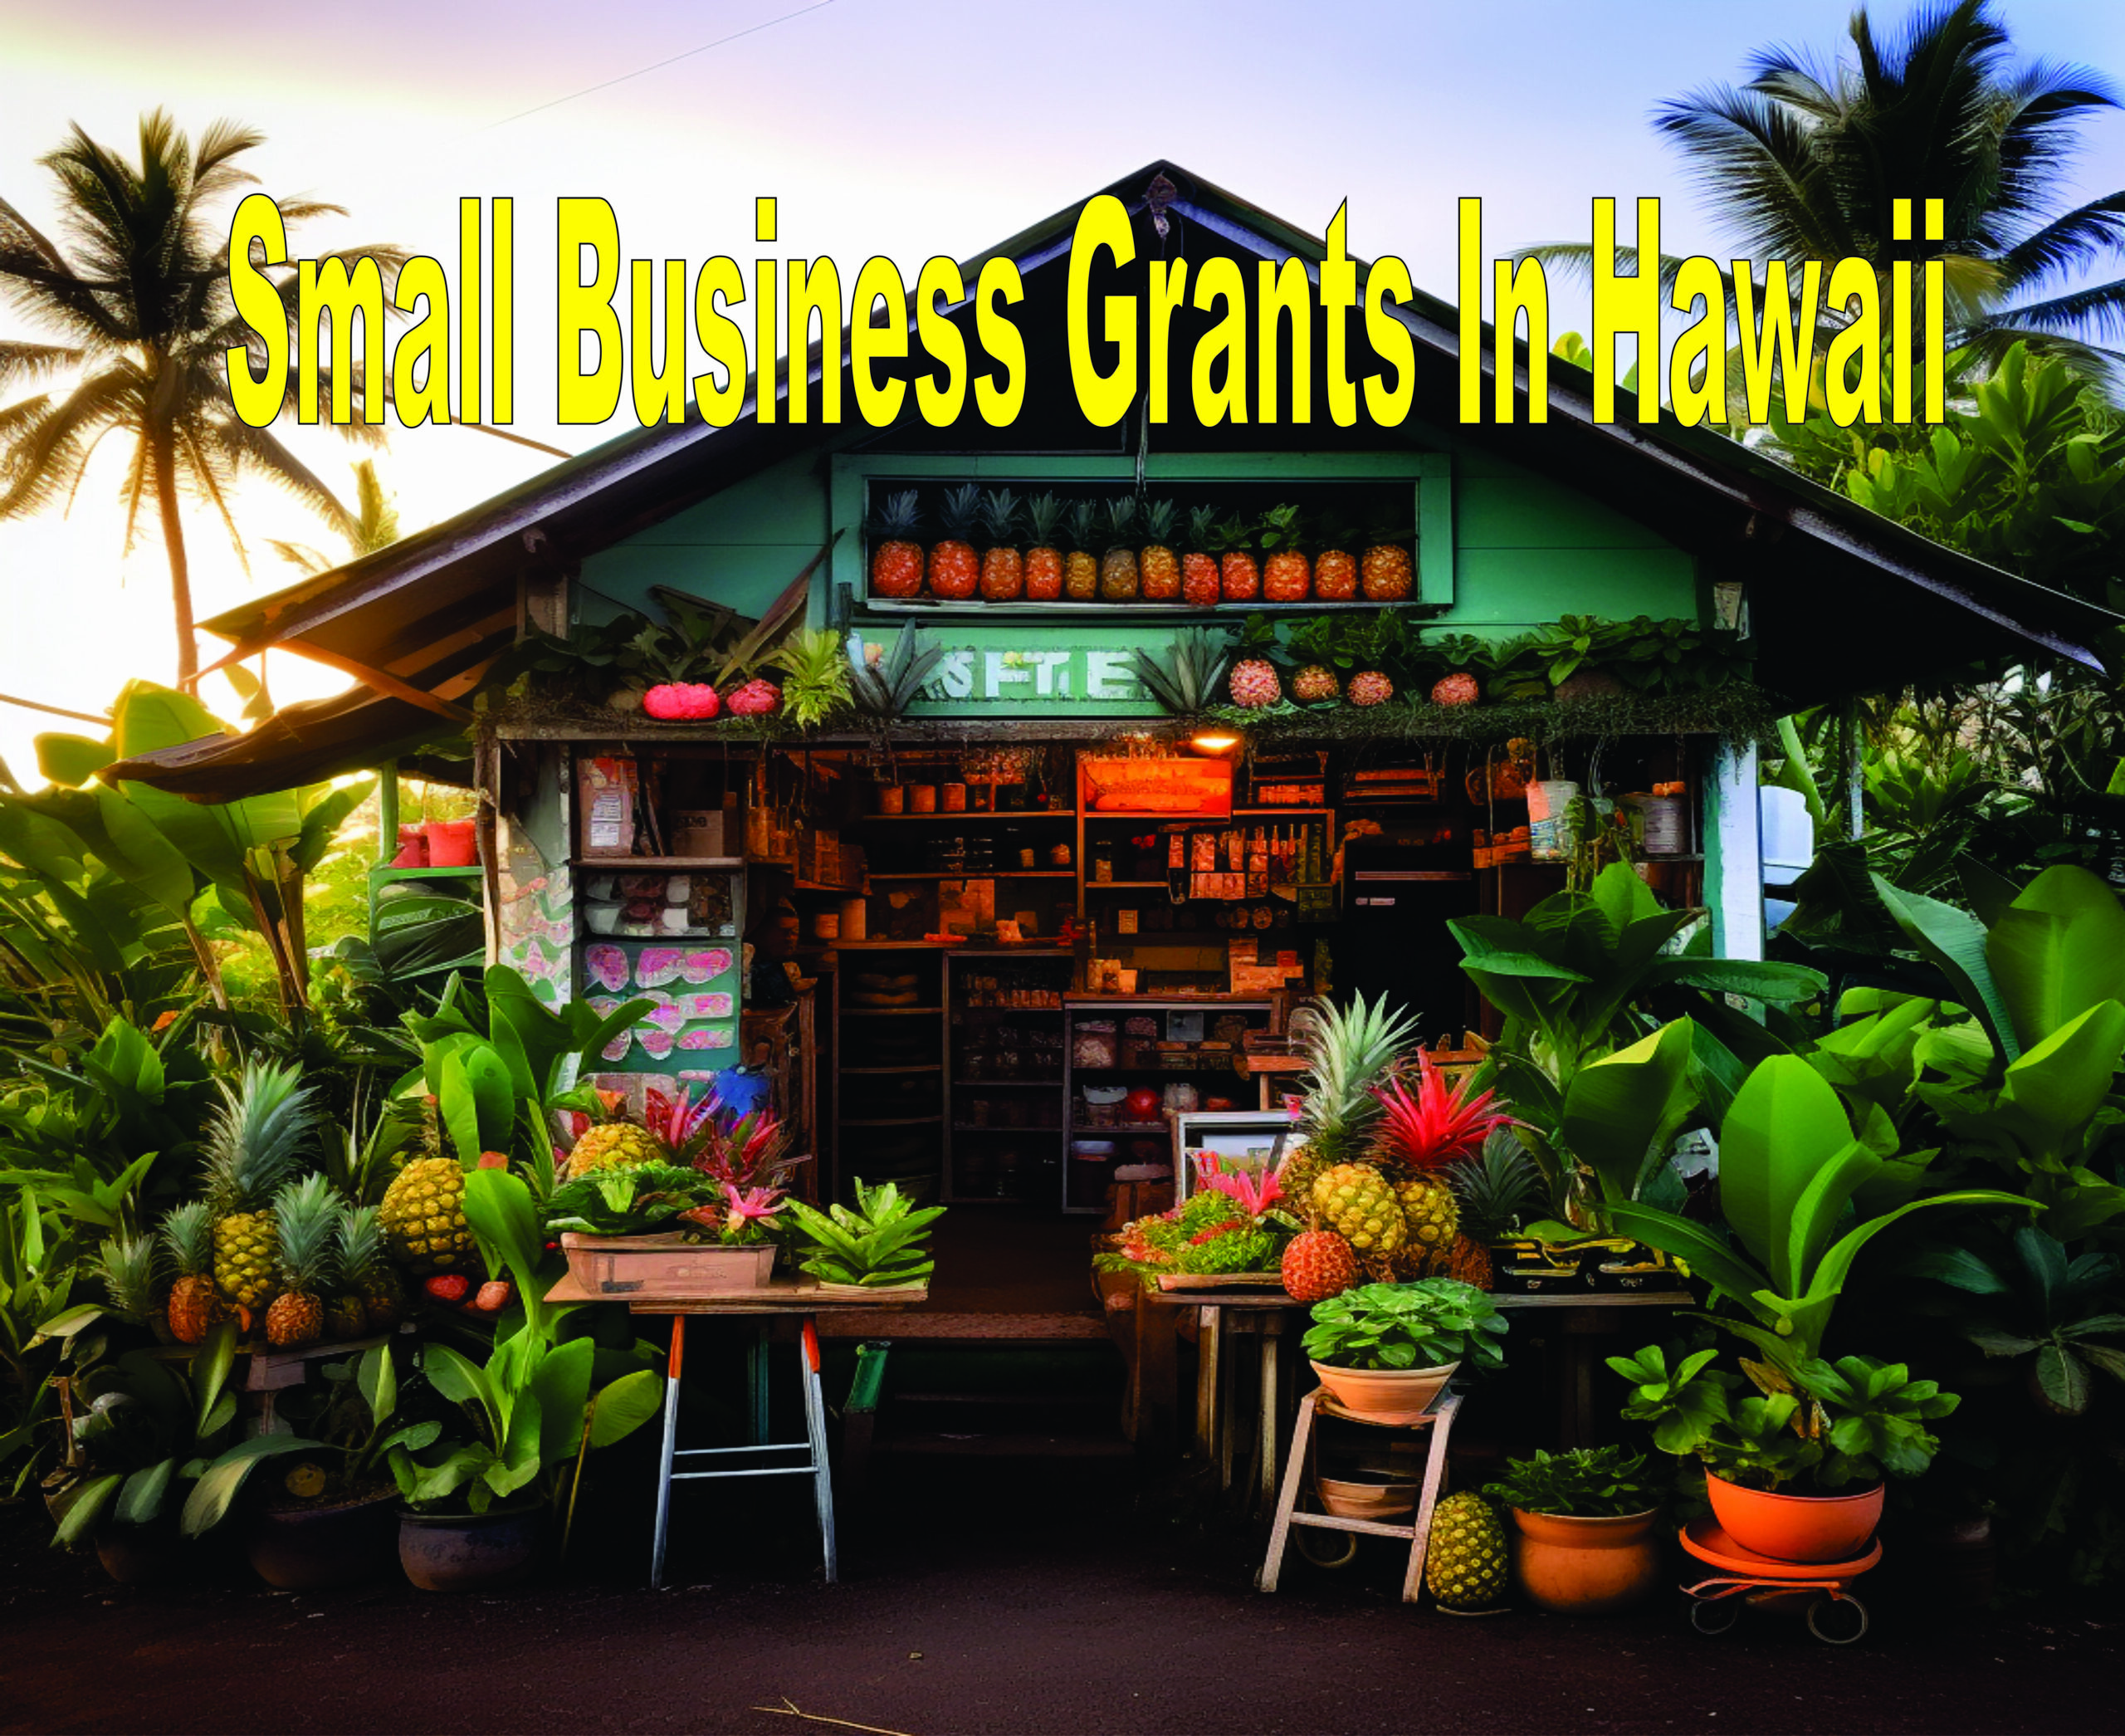 Small Business Grants In Hawaii